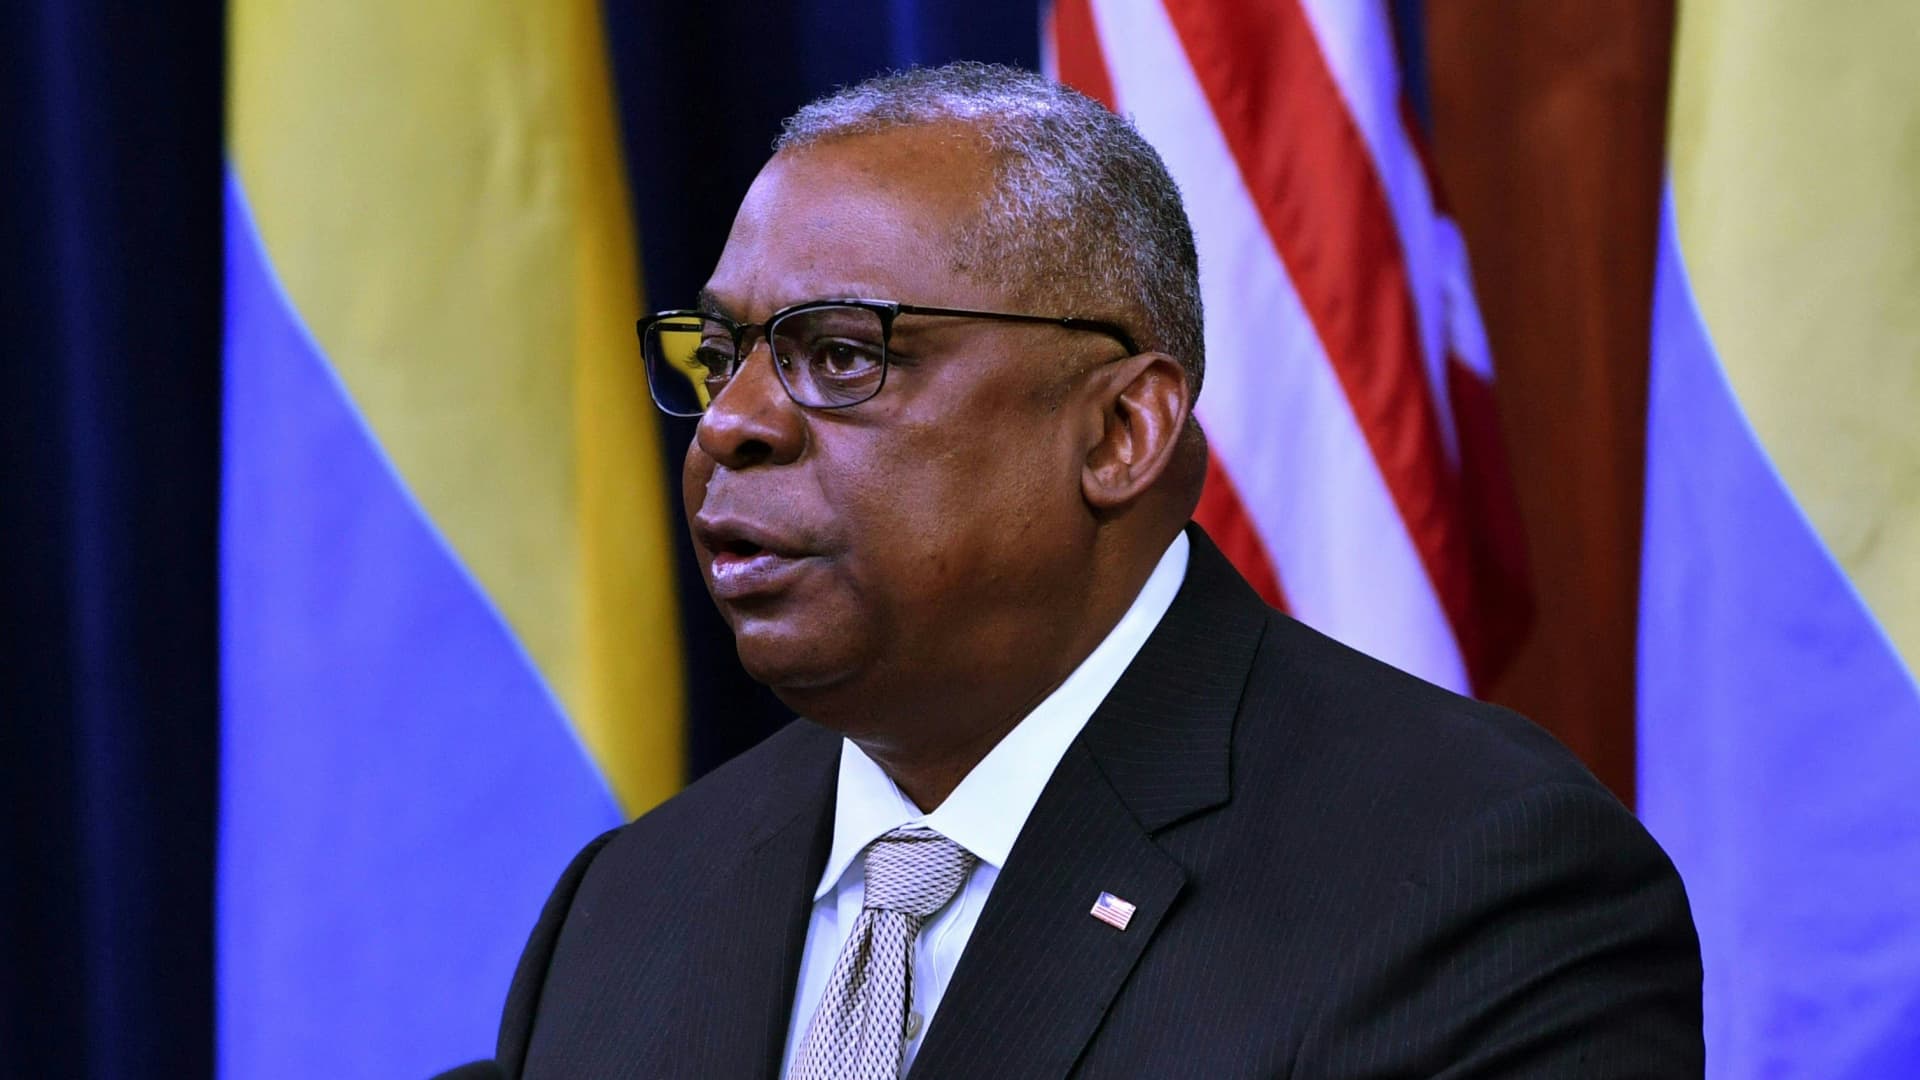 US Secretary of Defense Lloyd Austin participates in a virtual Ukraine Defense Contact Group meeting at the Pentagon in washington, DC, on May 23, 2022.